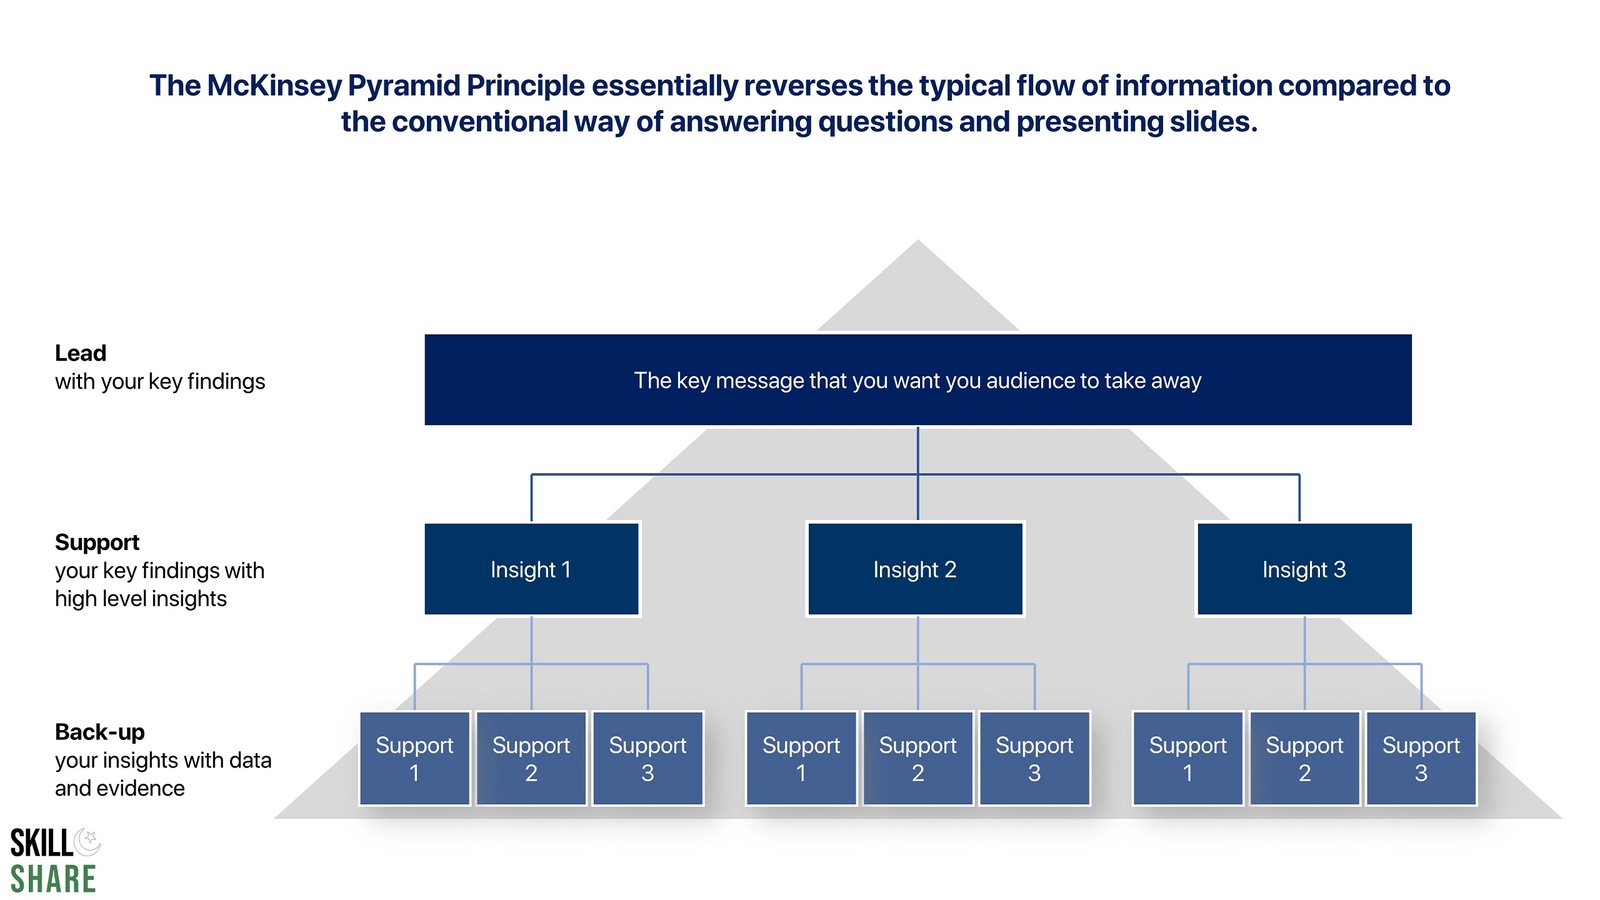 How to use the McKinsey Pyramid Principle